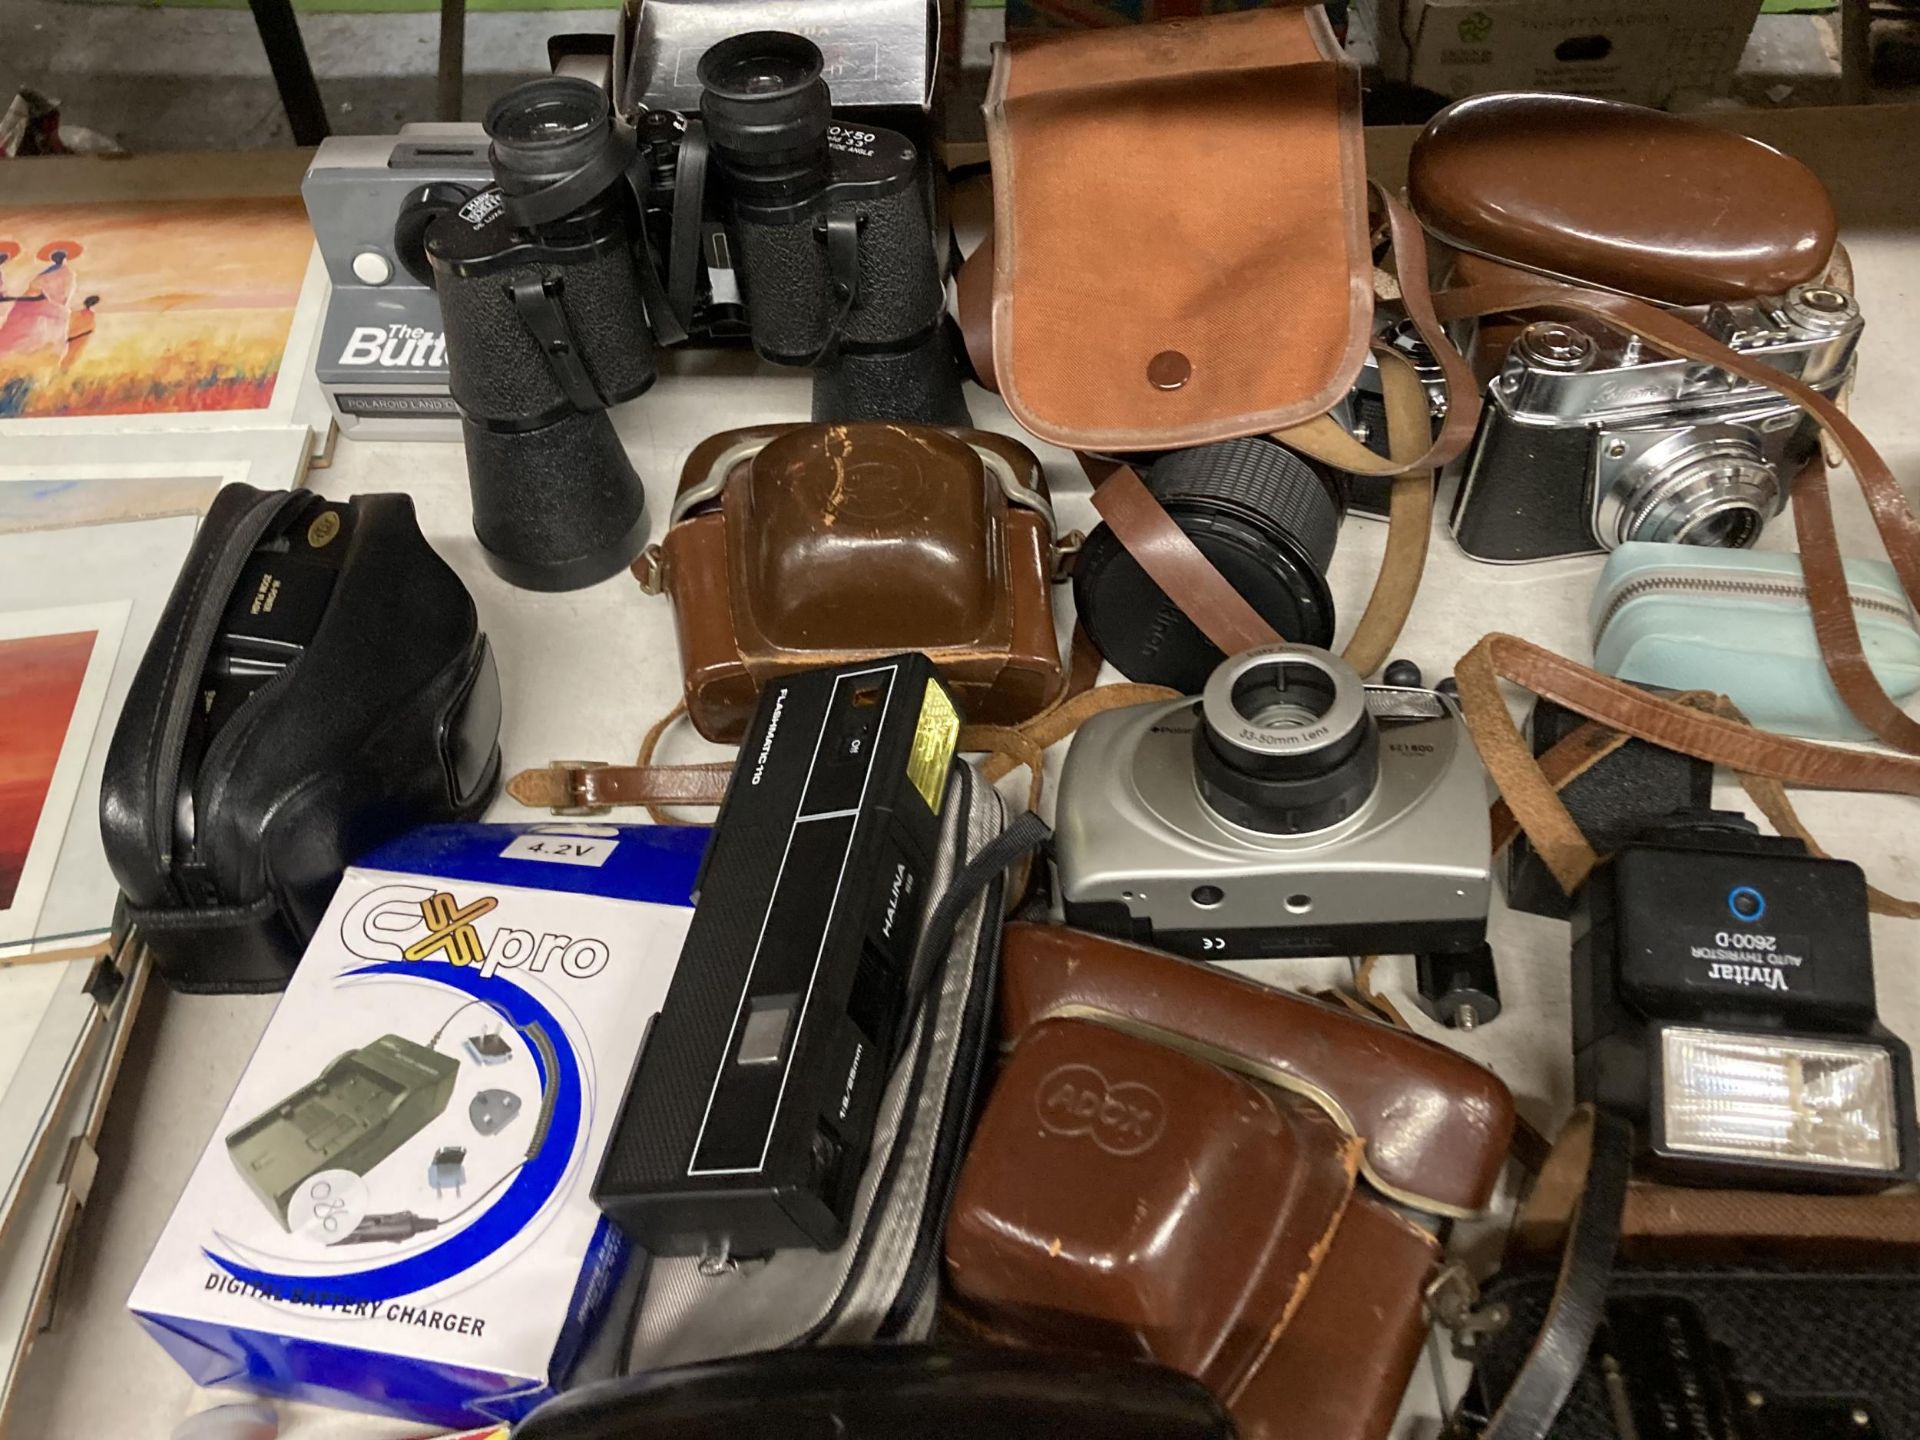 A COLLECTION OF VINTAGE CAMERAS TO INCLUDE HALINA PAULETTE ELECTRIC, KODAK, ADOX, POLAROID EZ1800 - Image 3 of 4